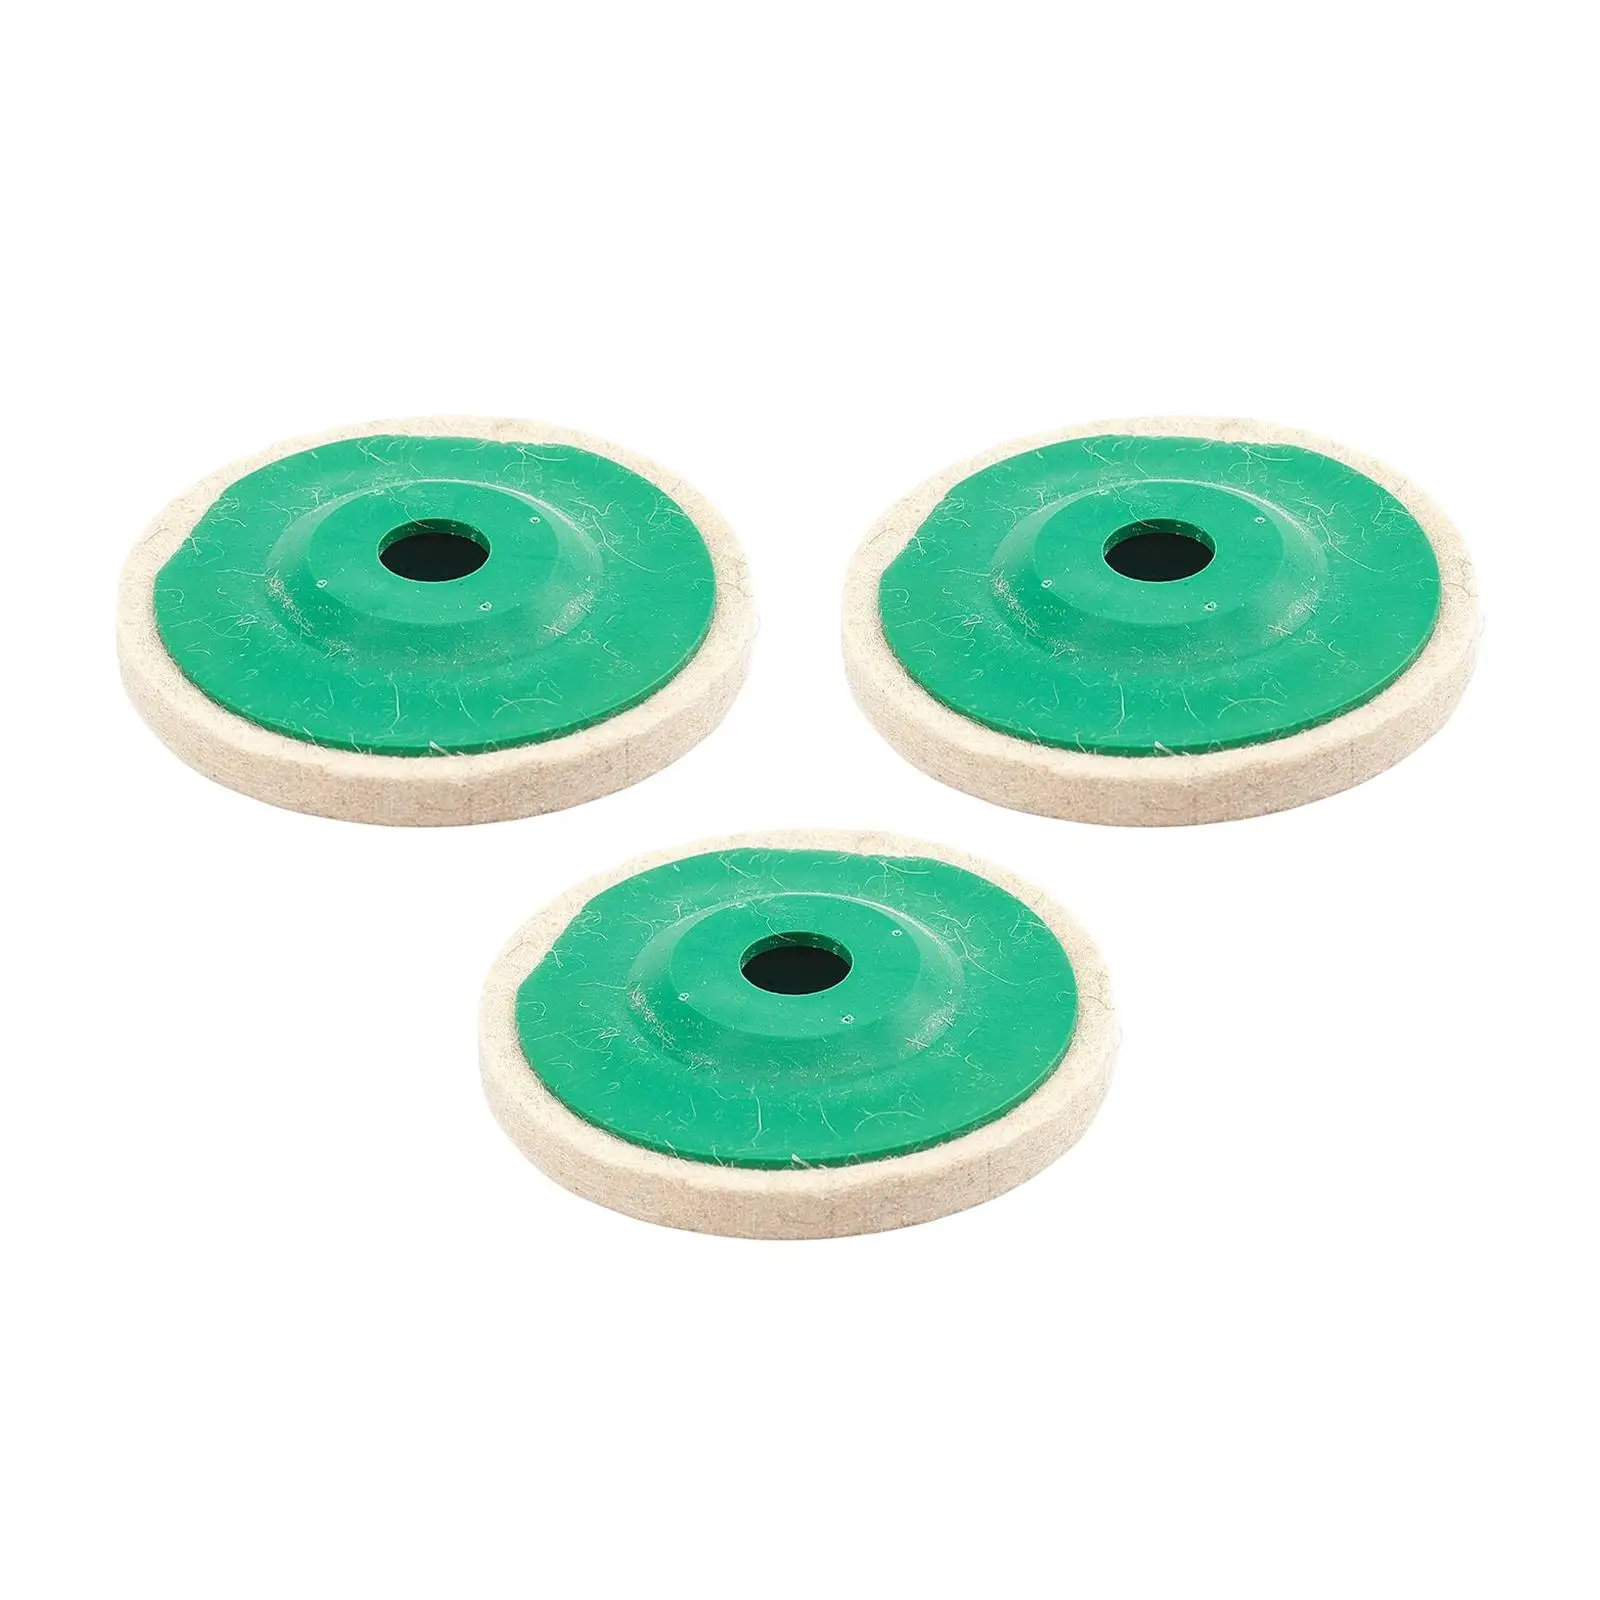 3Pcs Polishing Buffing Wheel Angel Grinder Disc Pad Cleaning Wood Supplies Cleaner Kitchen for Copper Ceramics Glass Marble